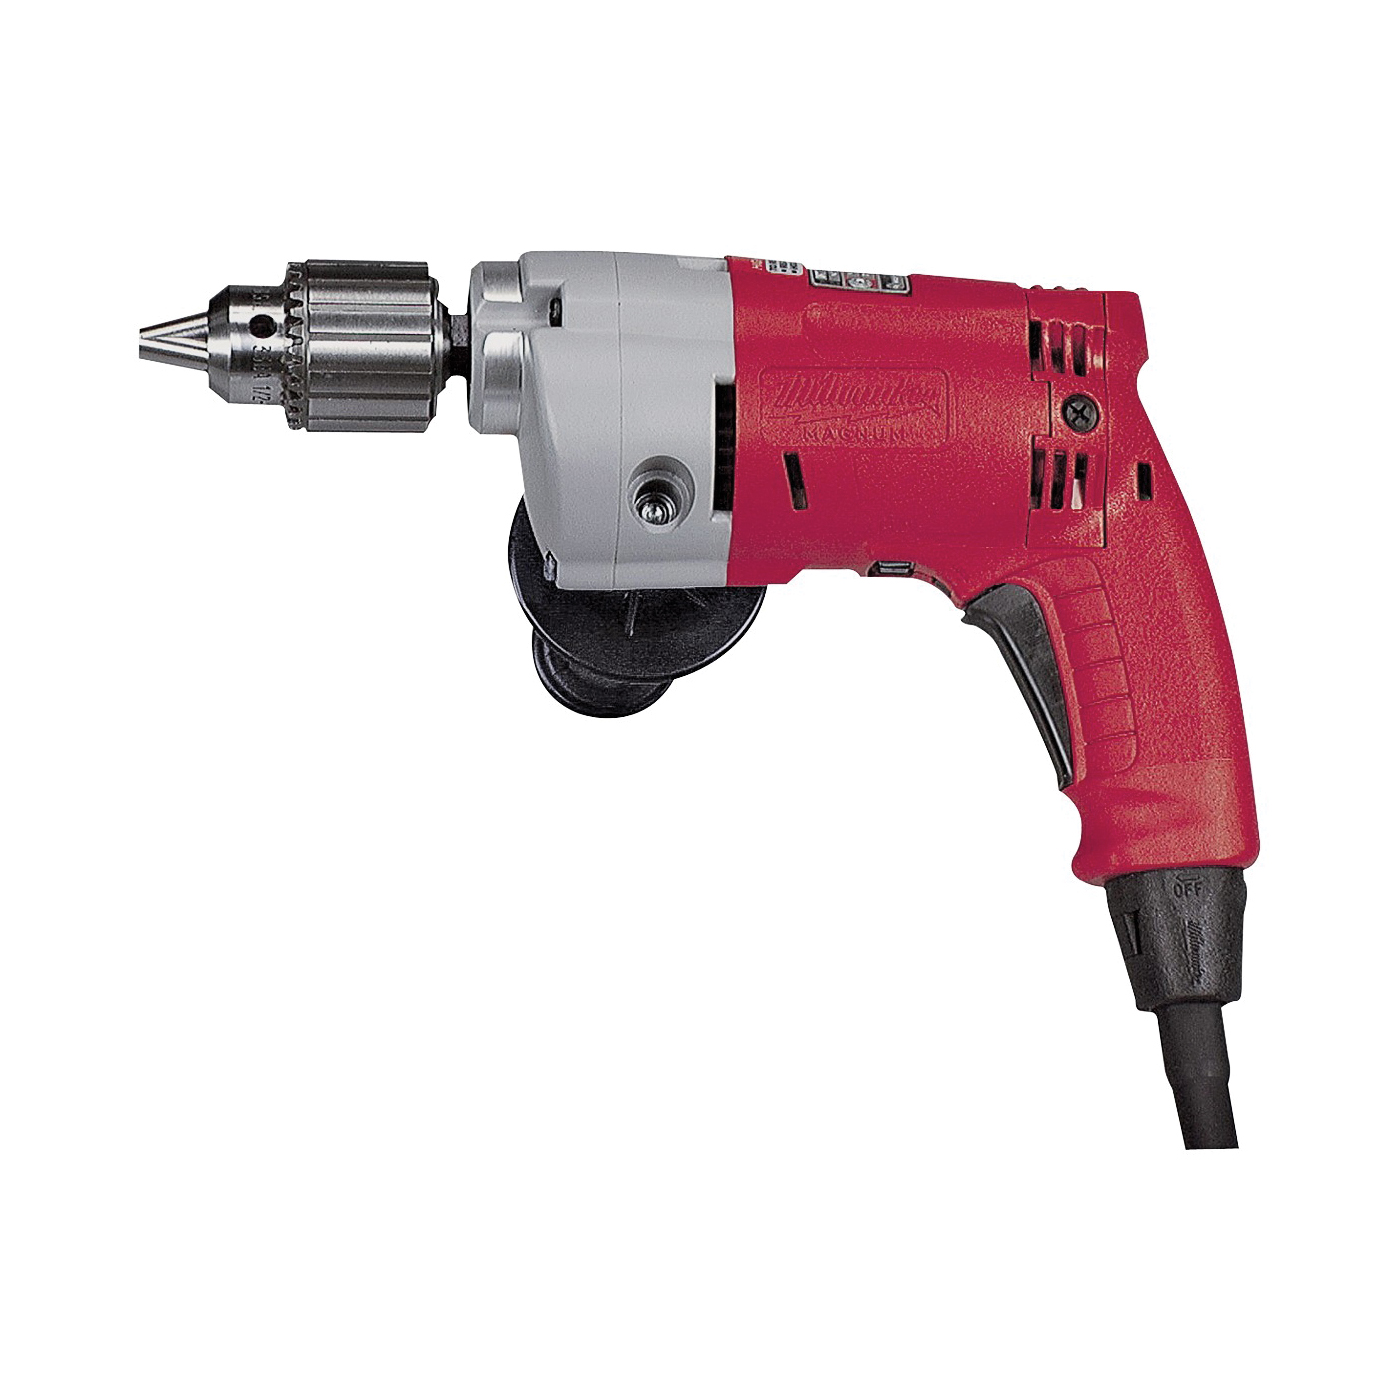 0234-6 Electric Drill, 5.5 A, 1/2 in Chuck, Keyed Chuck, 8 ft L Cord